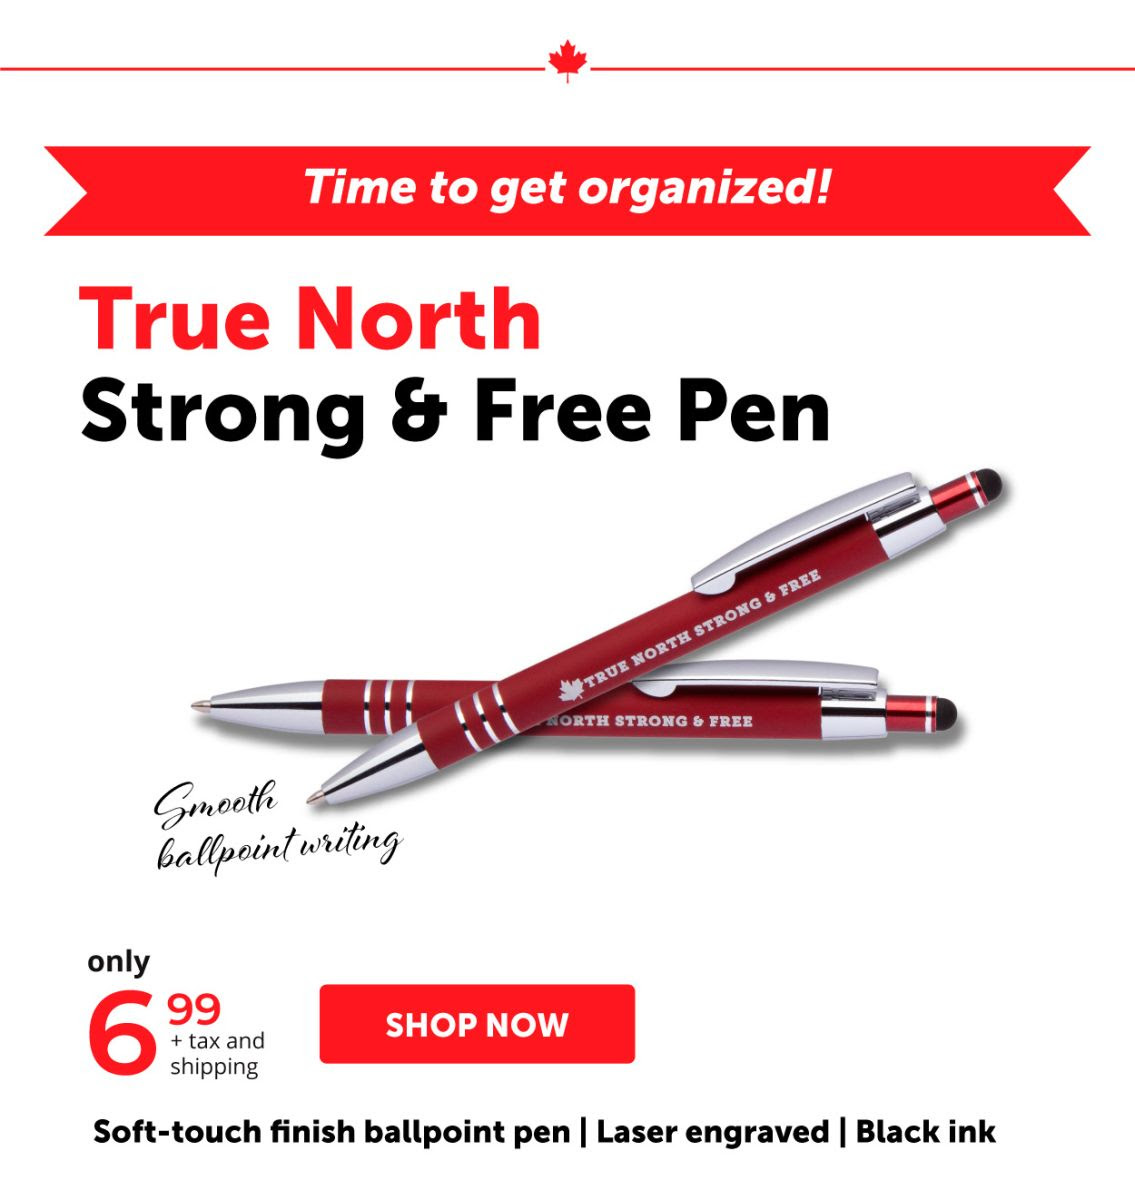 True North Strong & Free Pen